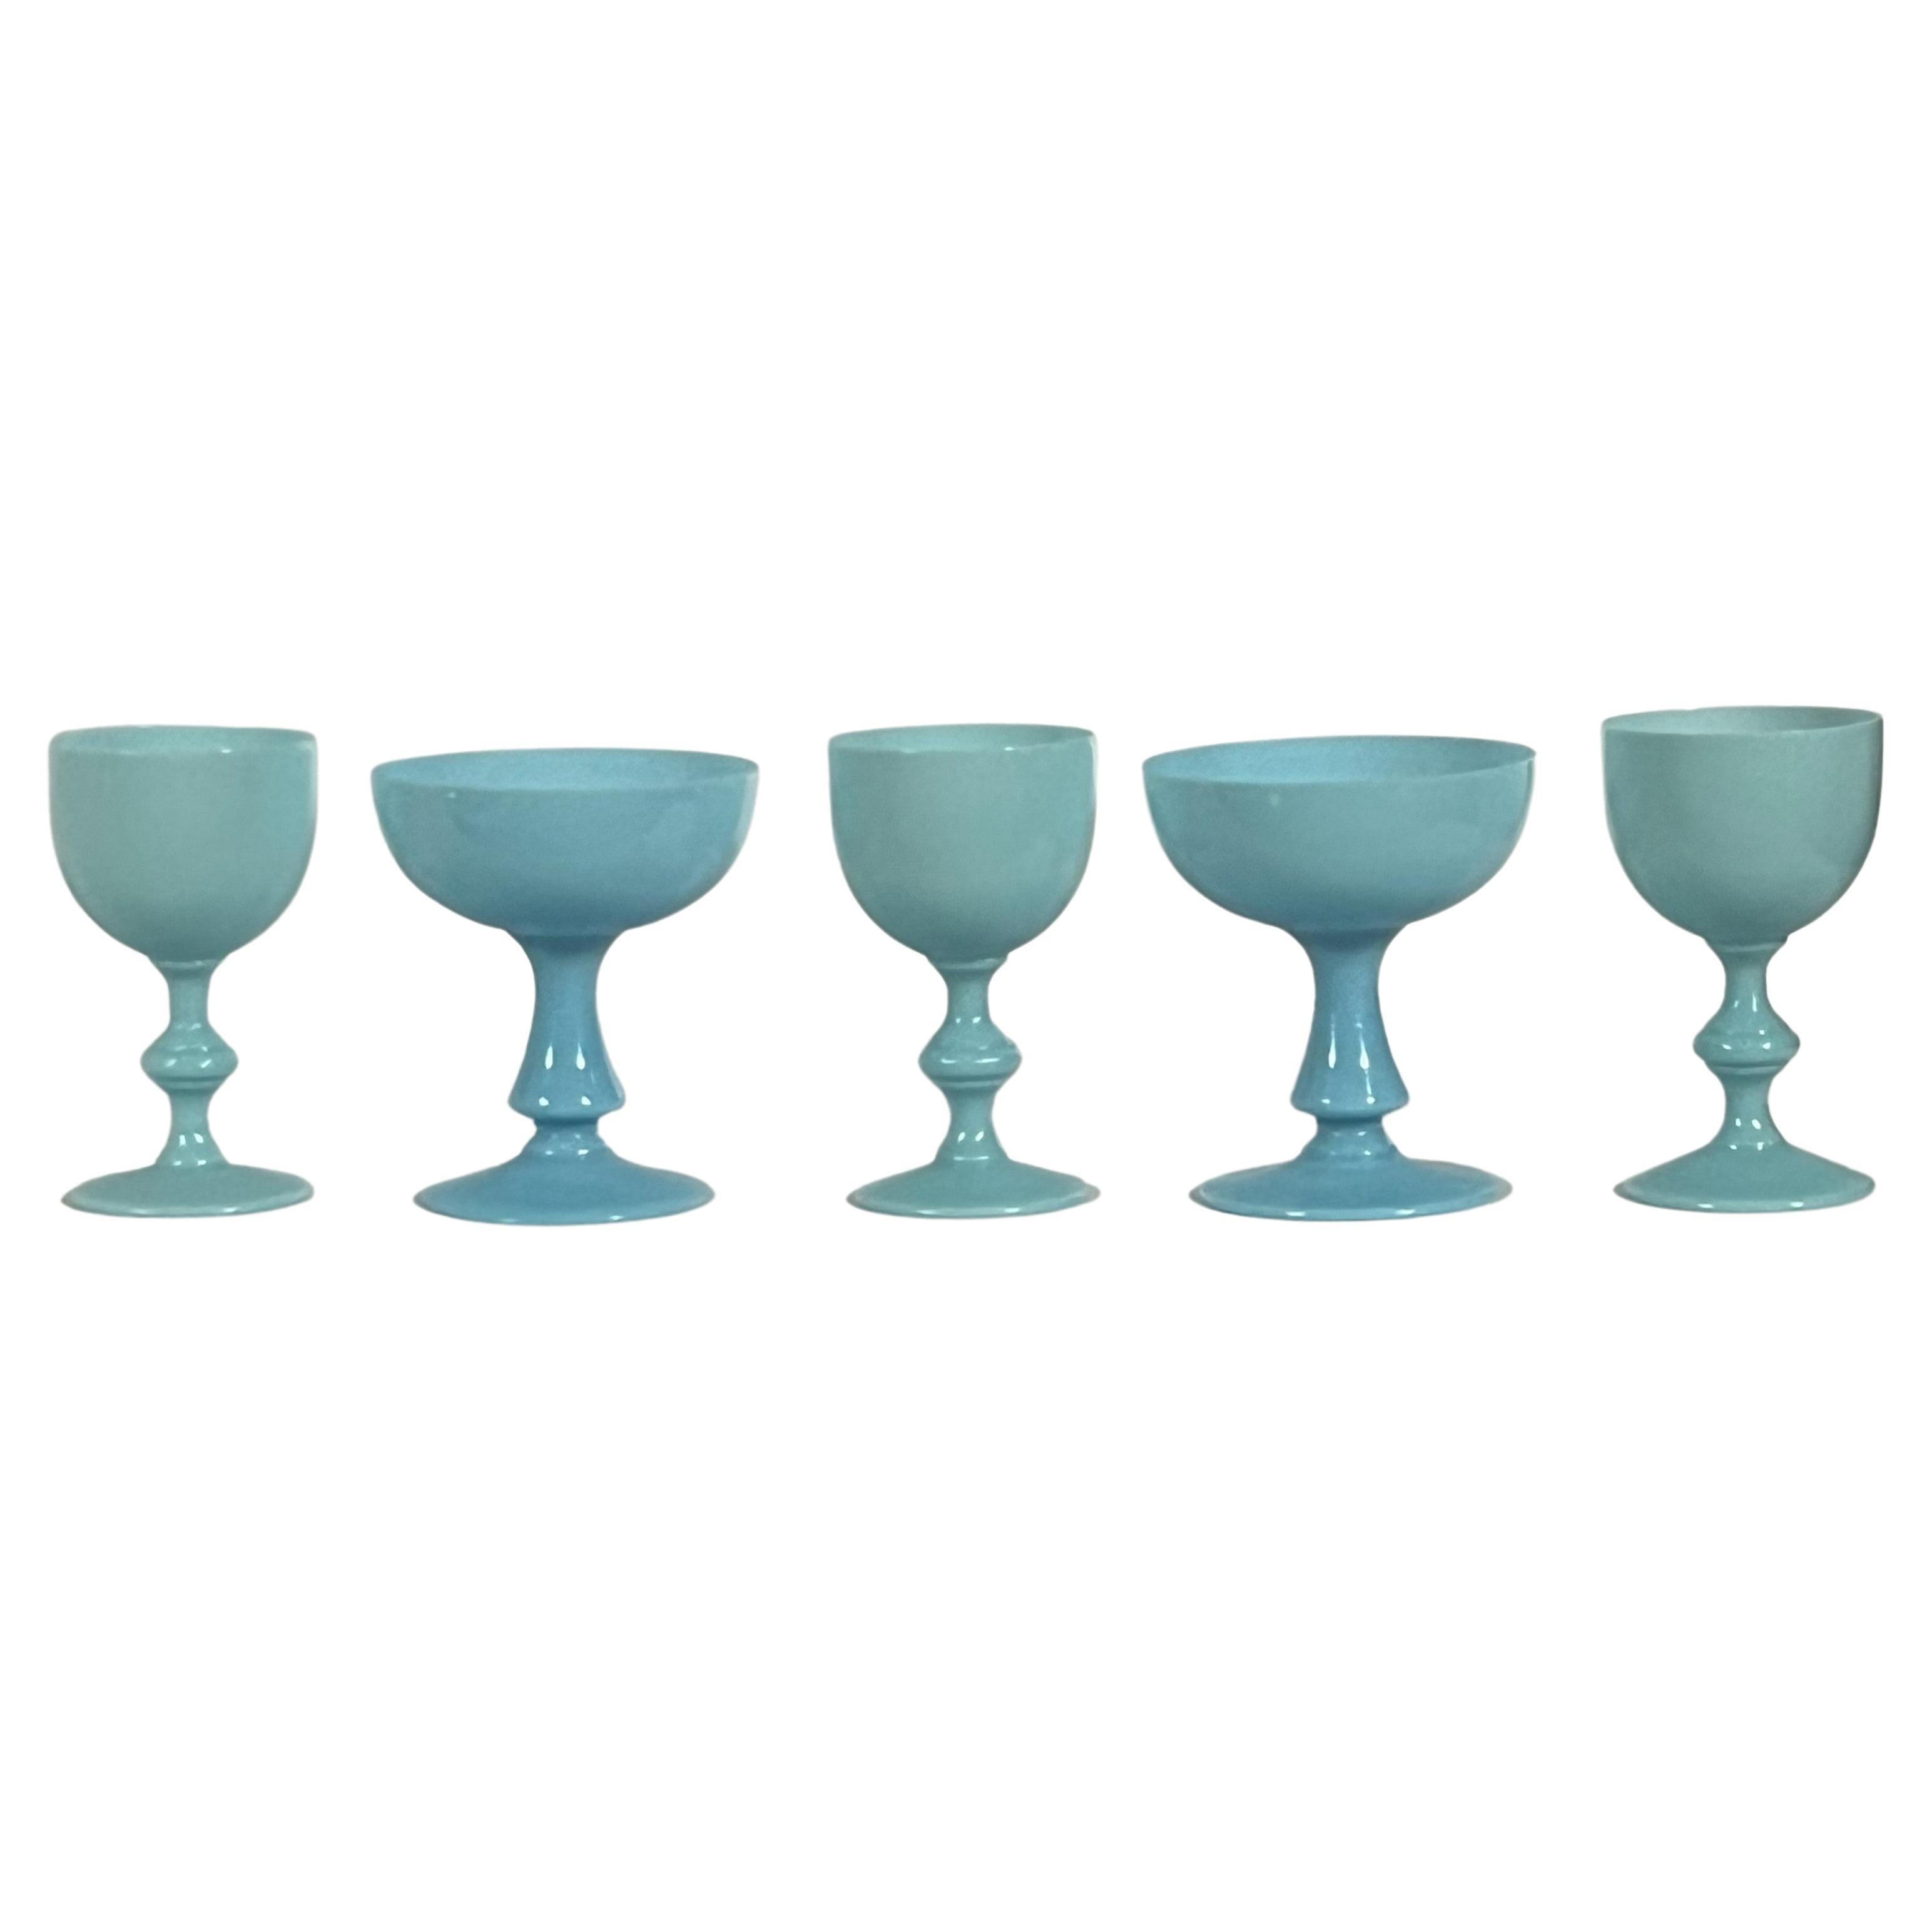 Portieux Vallerysthal Blue Opaline '2' Cordial '2' Sherbert Glasses 1930's +1